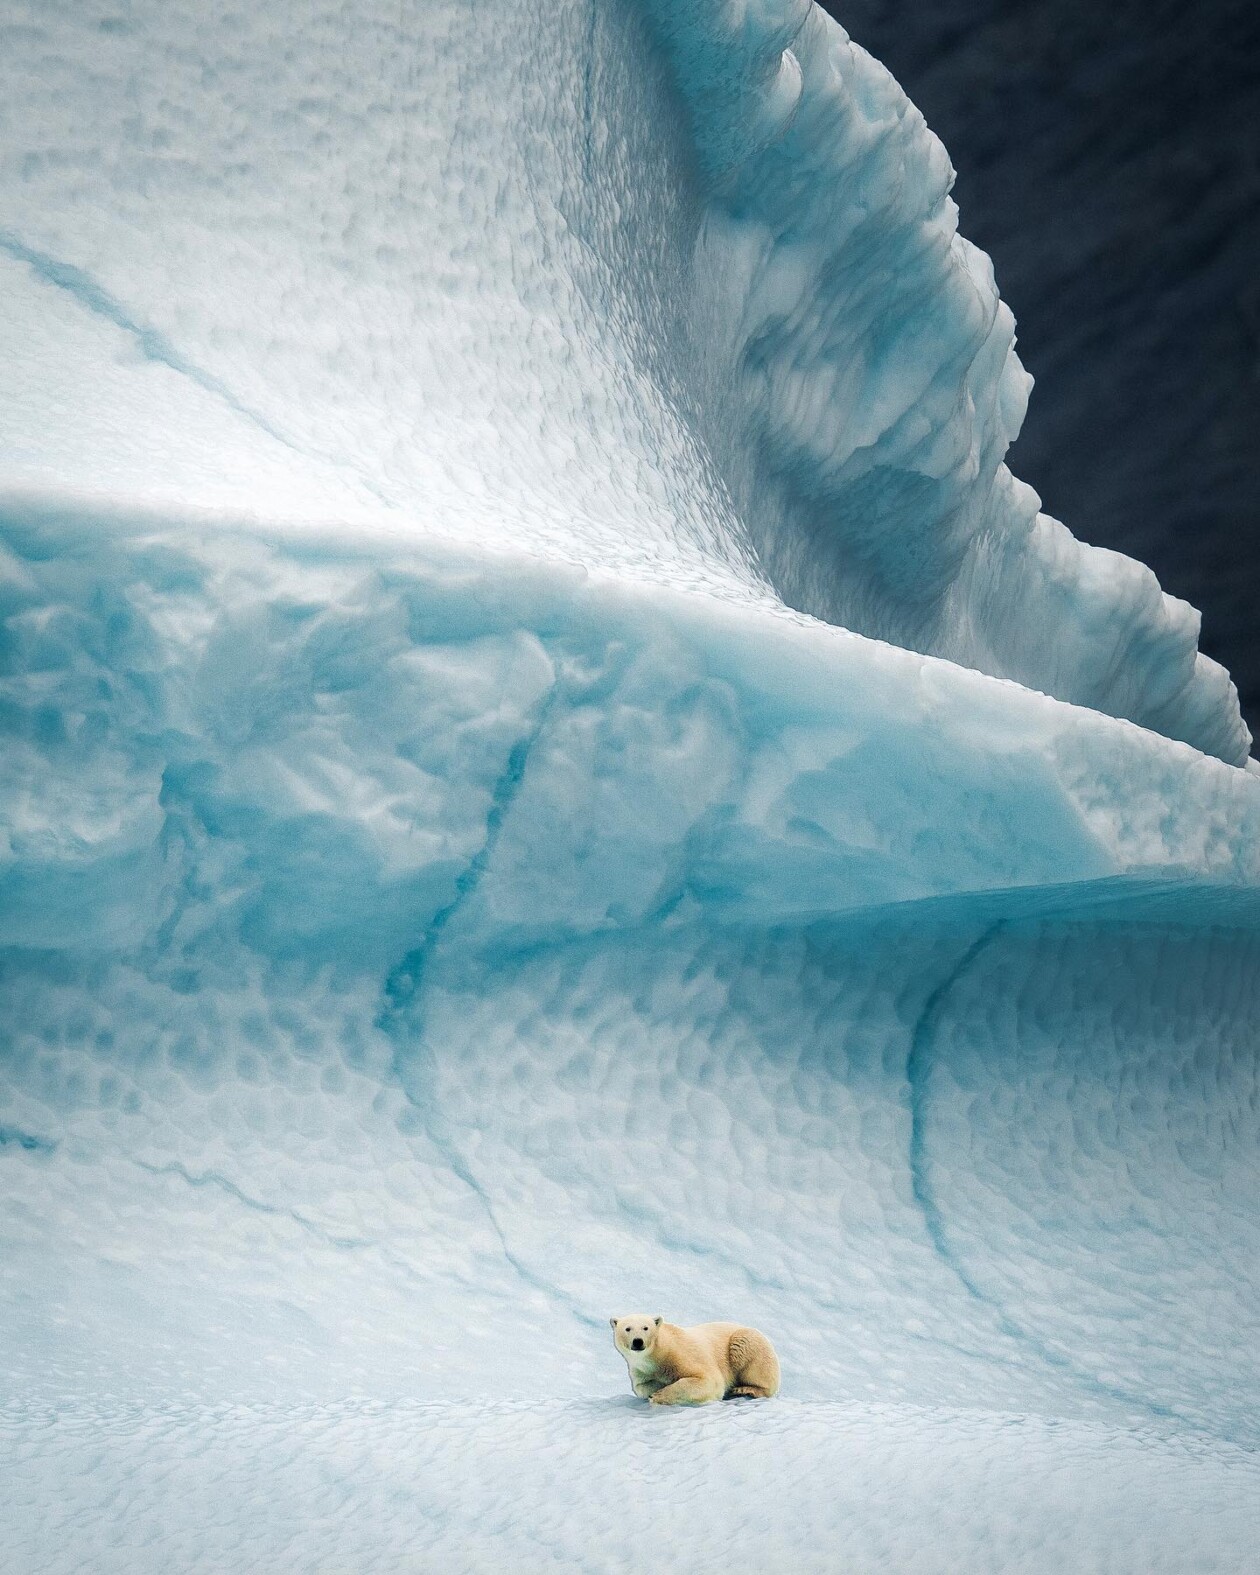 Captivating Pictures Of Arctic Animals By Konsta Punkka (8)